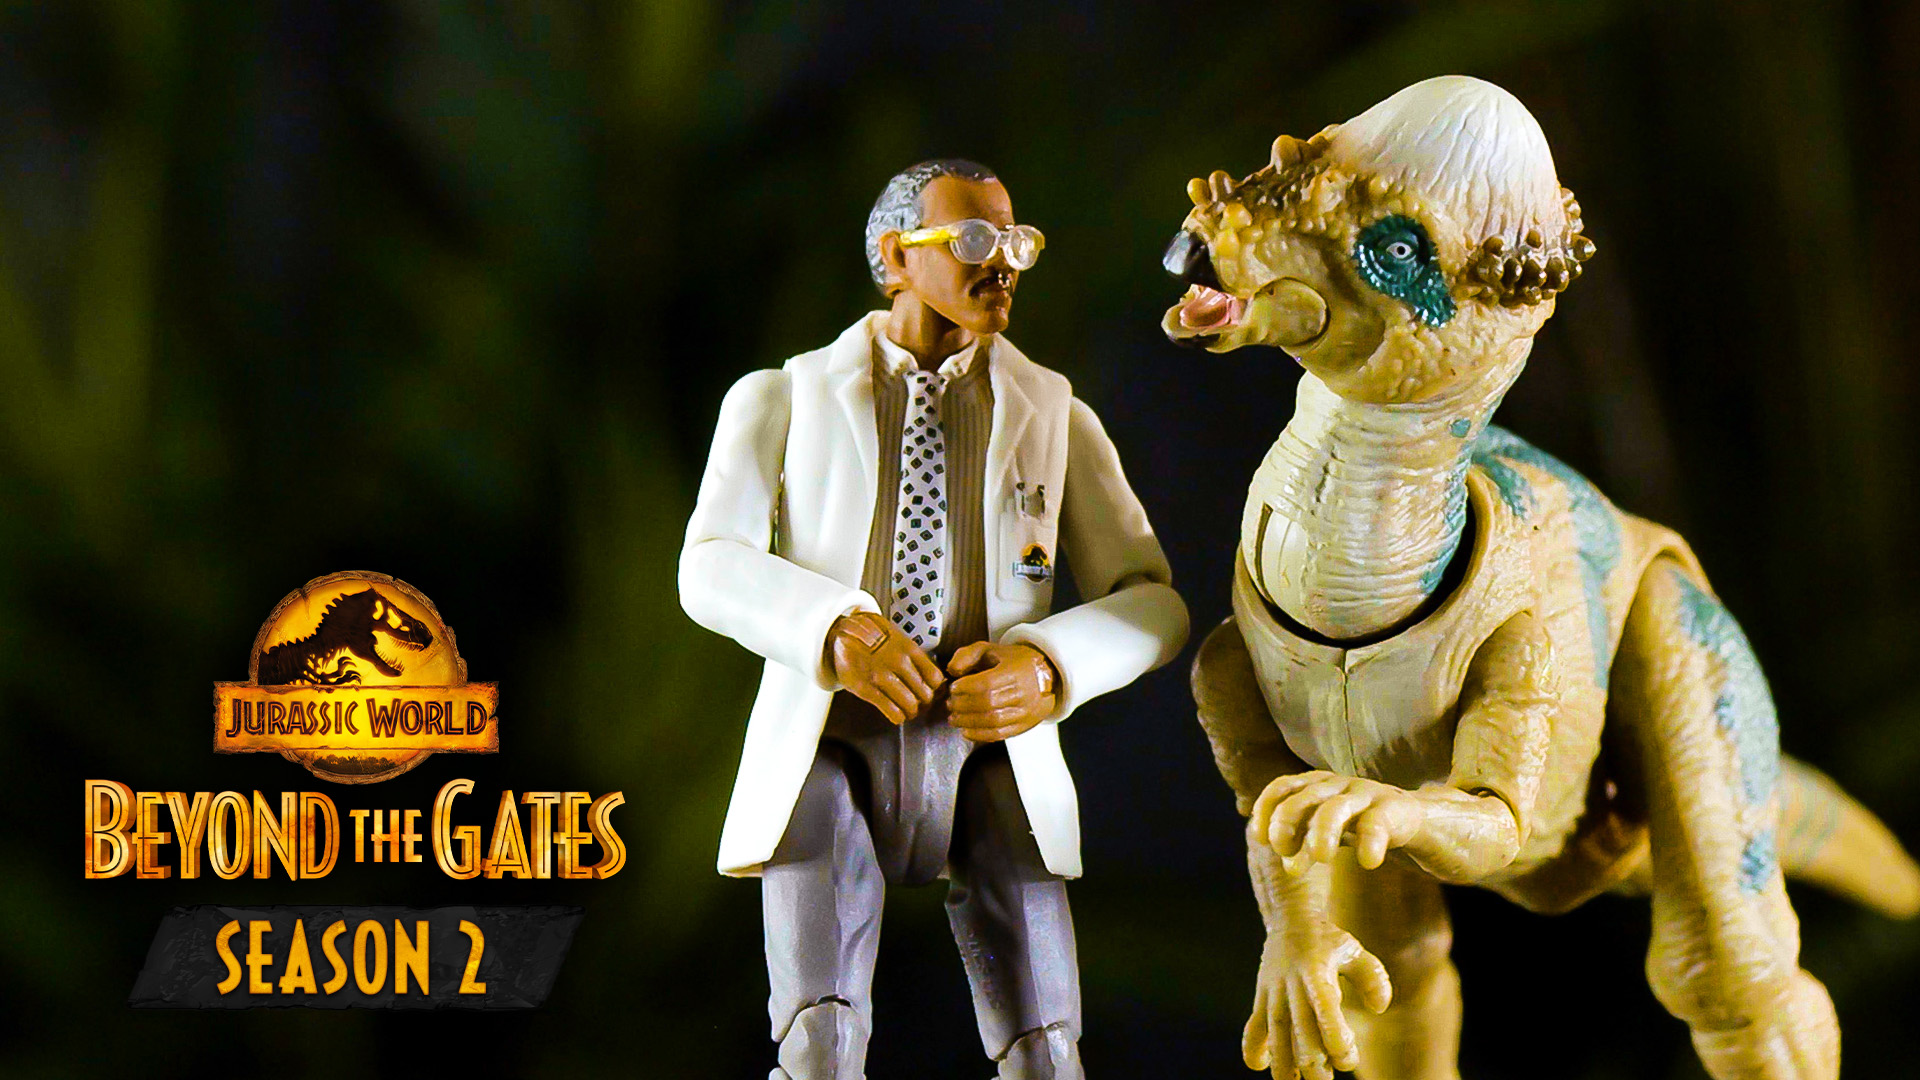 The Hammond Collection Expands with Ray Arnold & Pachycephalosaurus in New BEYOND THE GATES Episode!